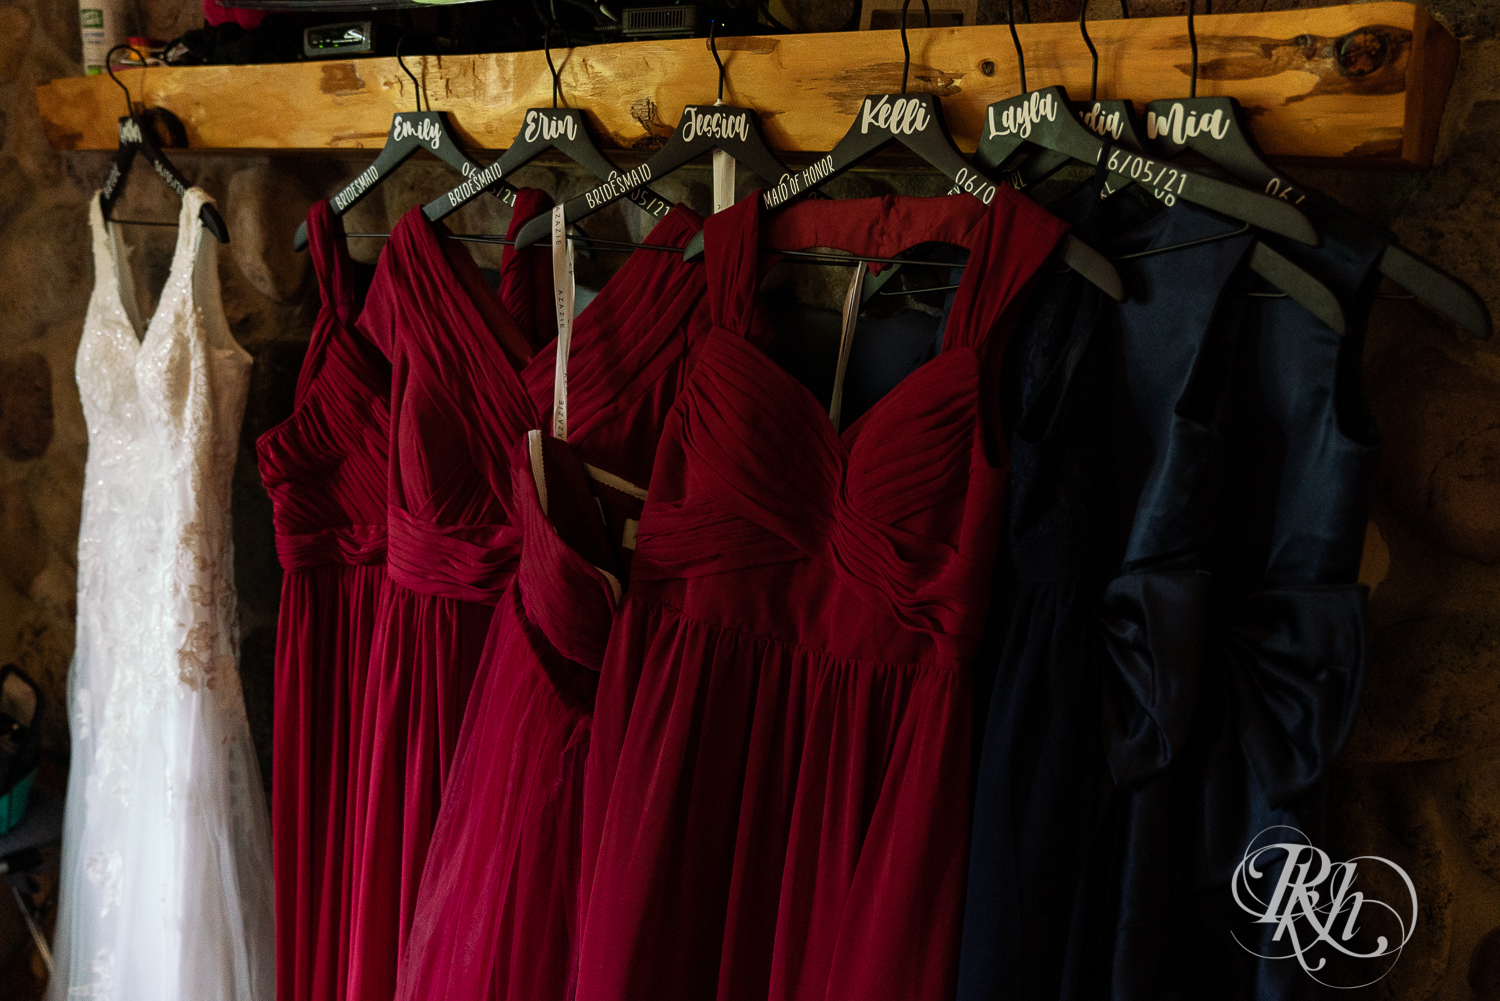 Wedding and bridesmaids dresses hanging up at Pine Peaks Event Center in Pine River, Minnesota.